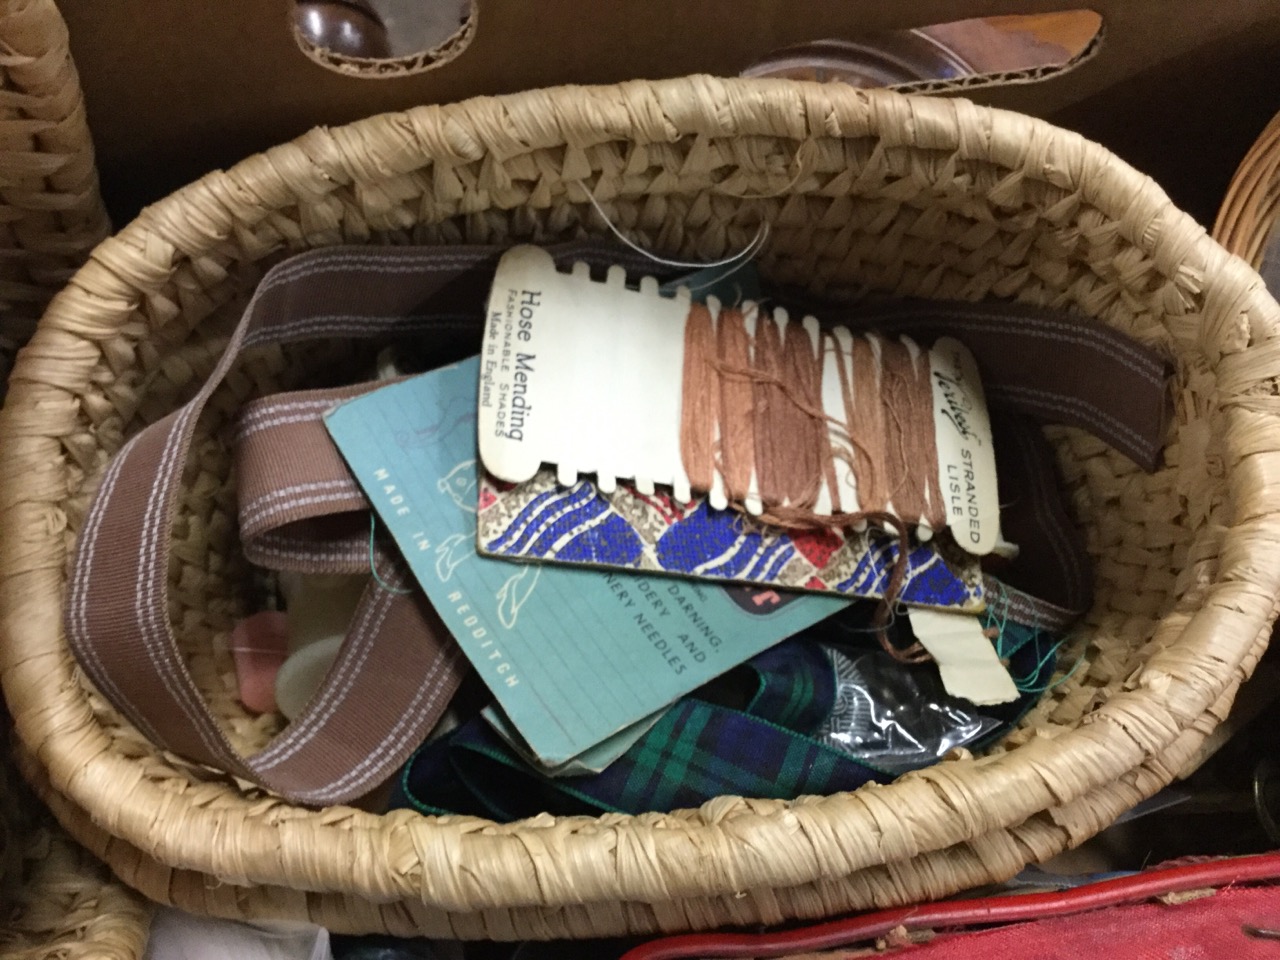 A box of miscellaneous sewing materials including buttons, cottons, beads, sewing baskets, - Image 3 of 3